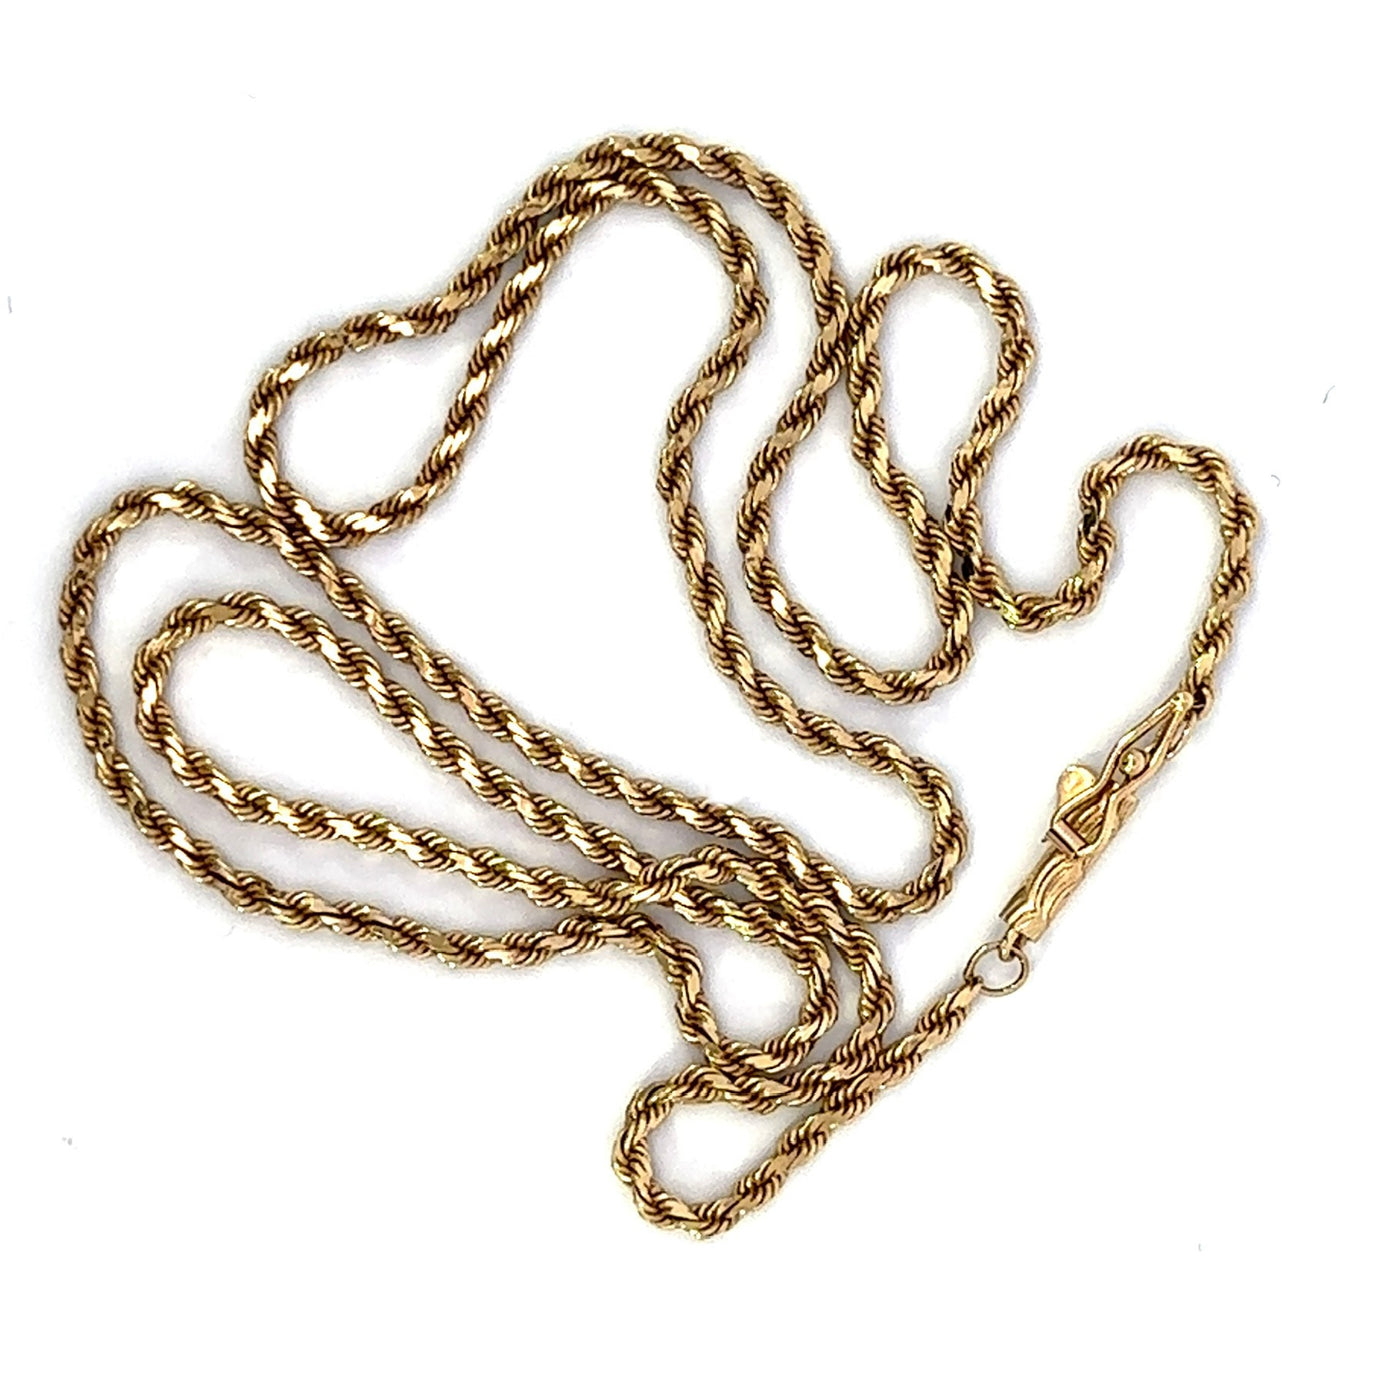 Vintage Rope Chain no. 7